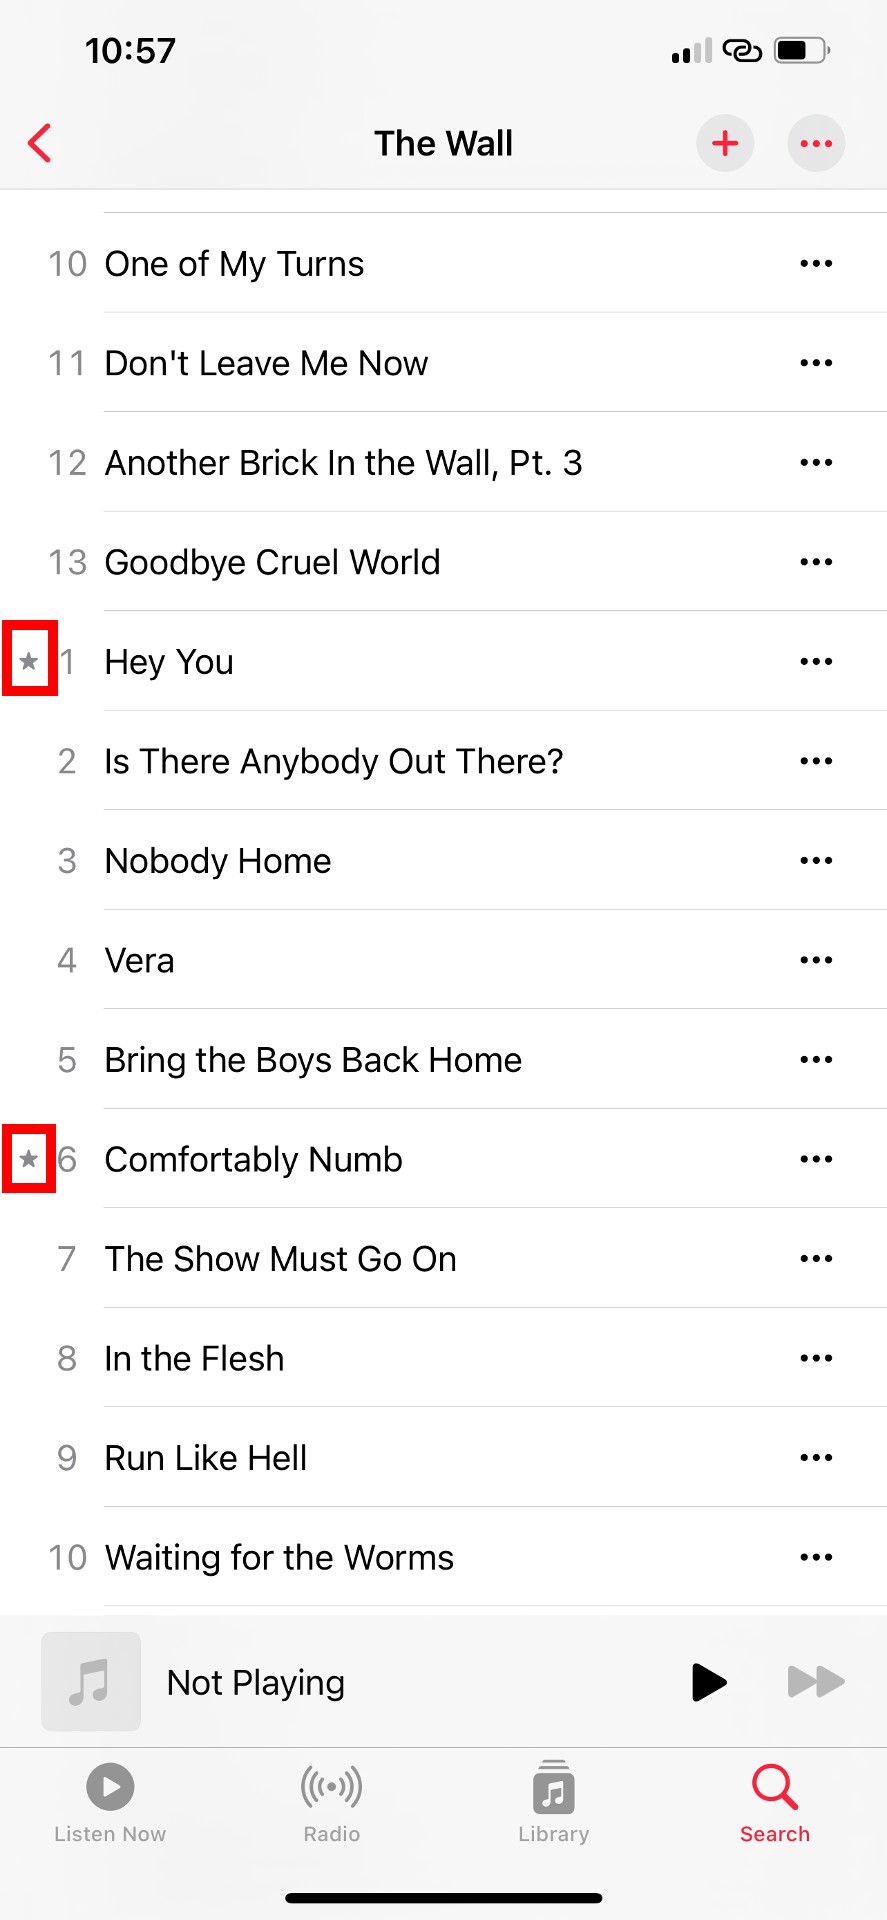 Apple Music album showing tracks with star icons